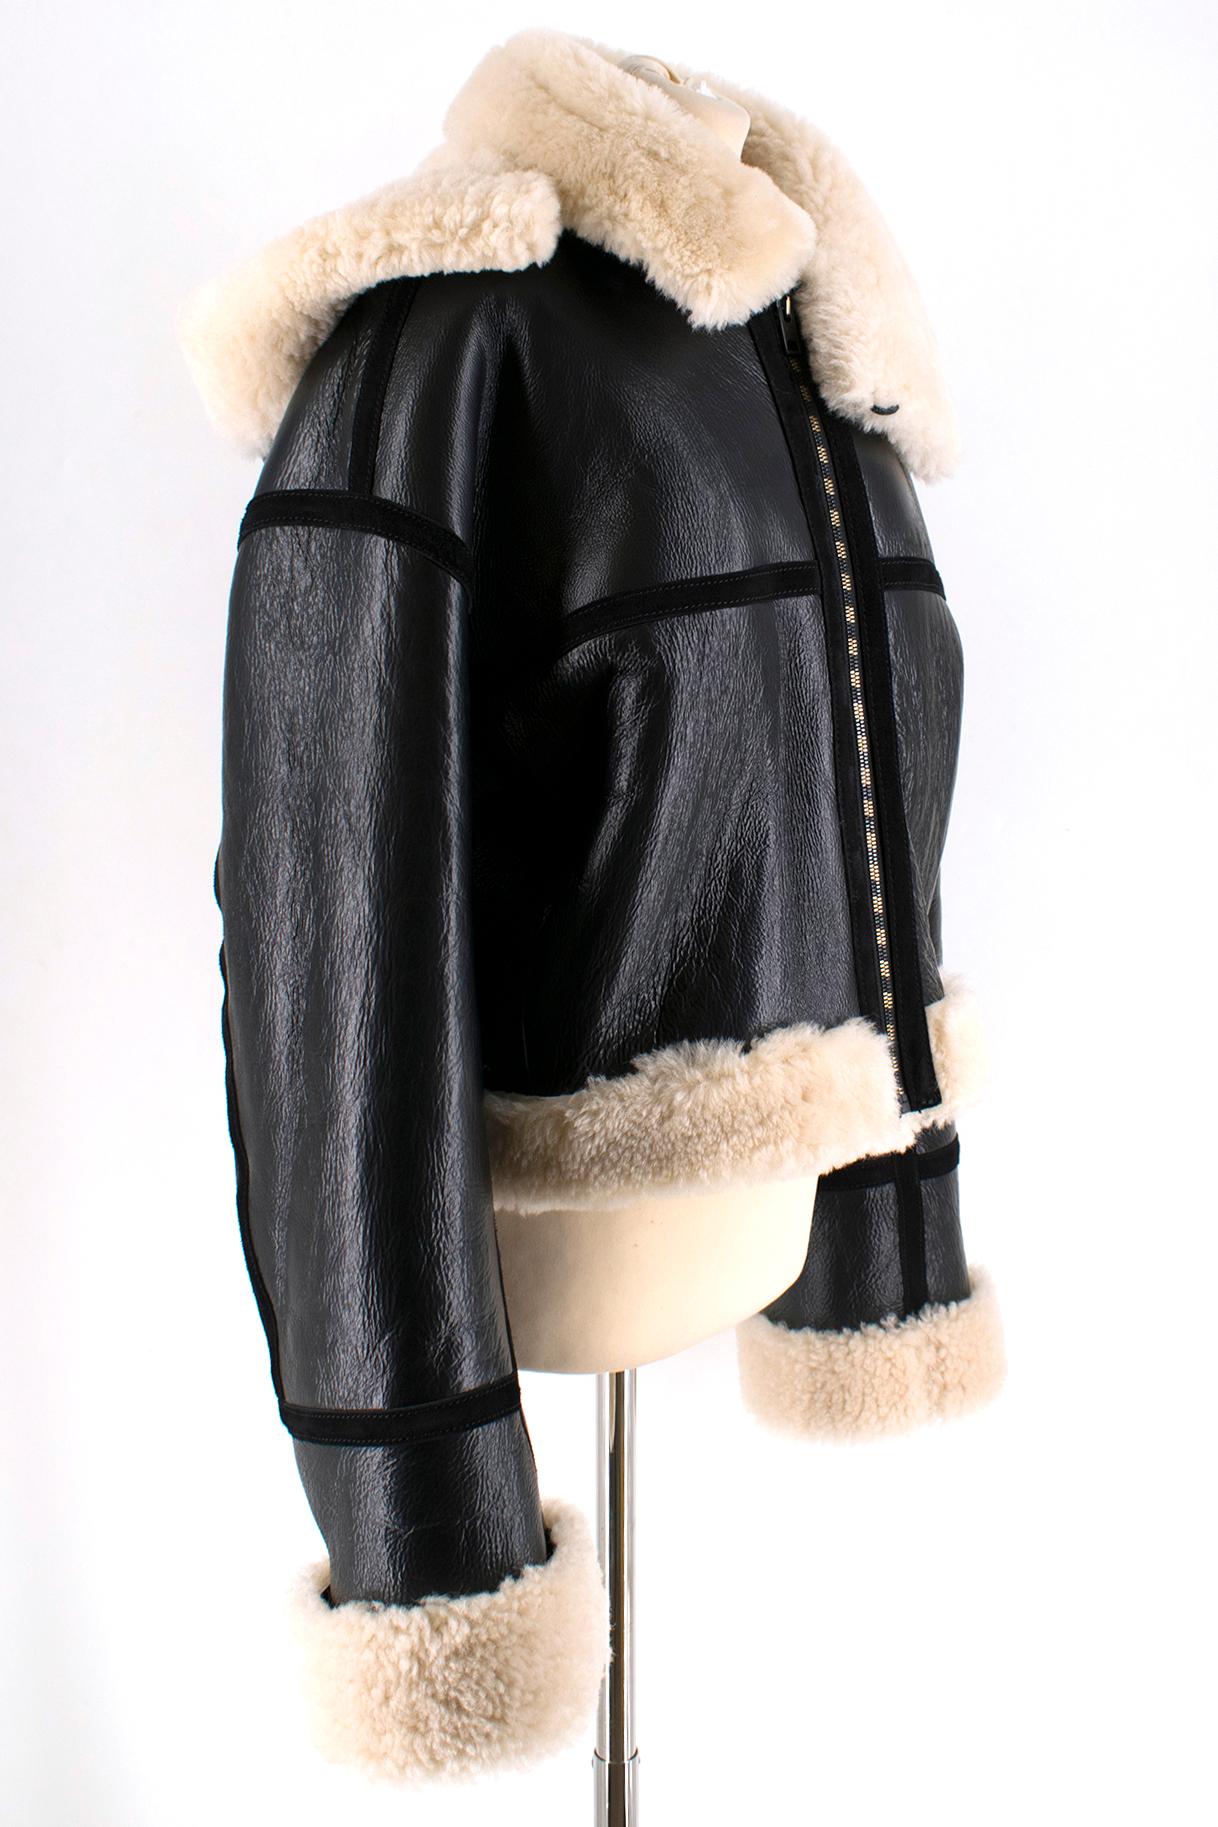 Petar Petrov Shearling-lined Biker Jacket

Black and white lambskin and calf leather shearling-lined biker jacket
Gold and black hardware
Heavyweight 
Neck button closure
Suede detailing 
Removable hood
Fur collar 

Please note, these items are